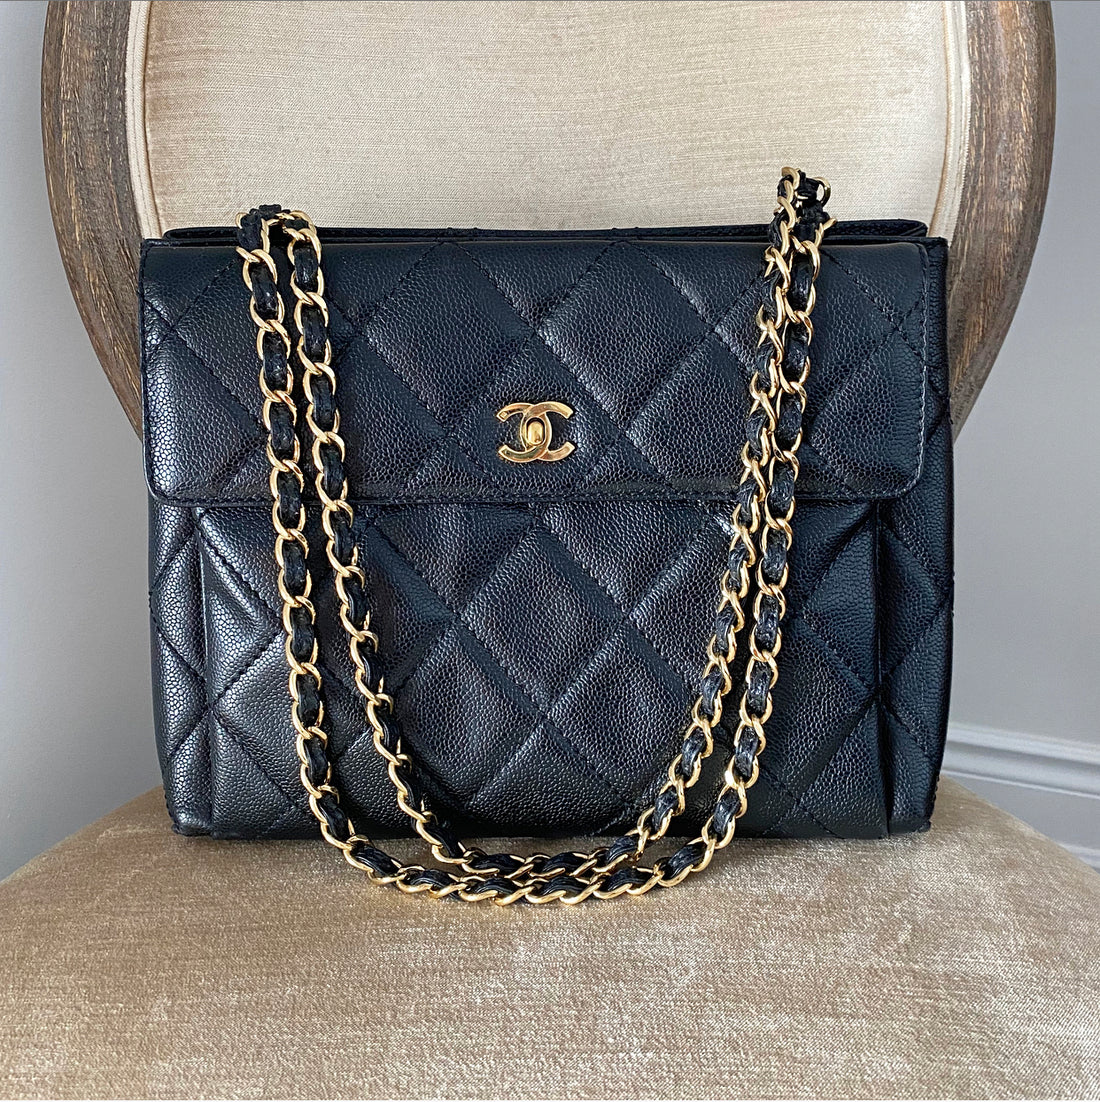 Chanel Vintage Caviar Leather Black Flap Tote Bag with Gold Chain